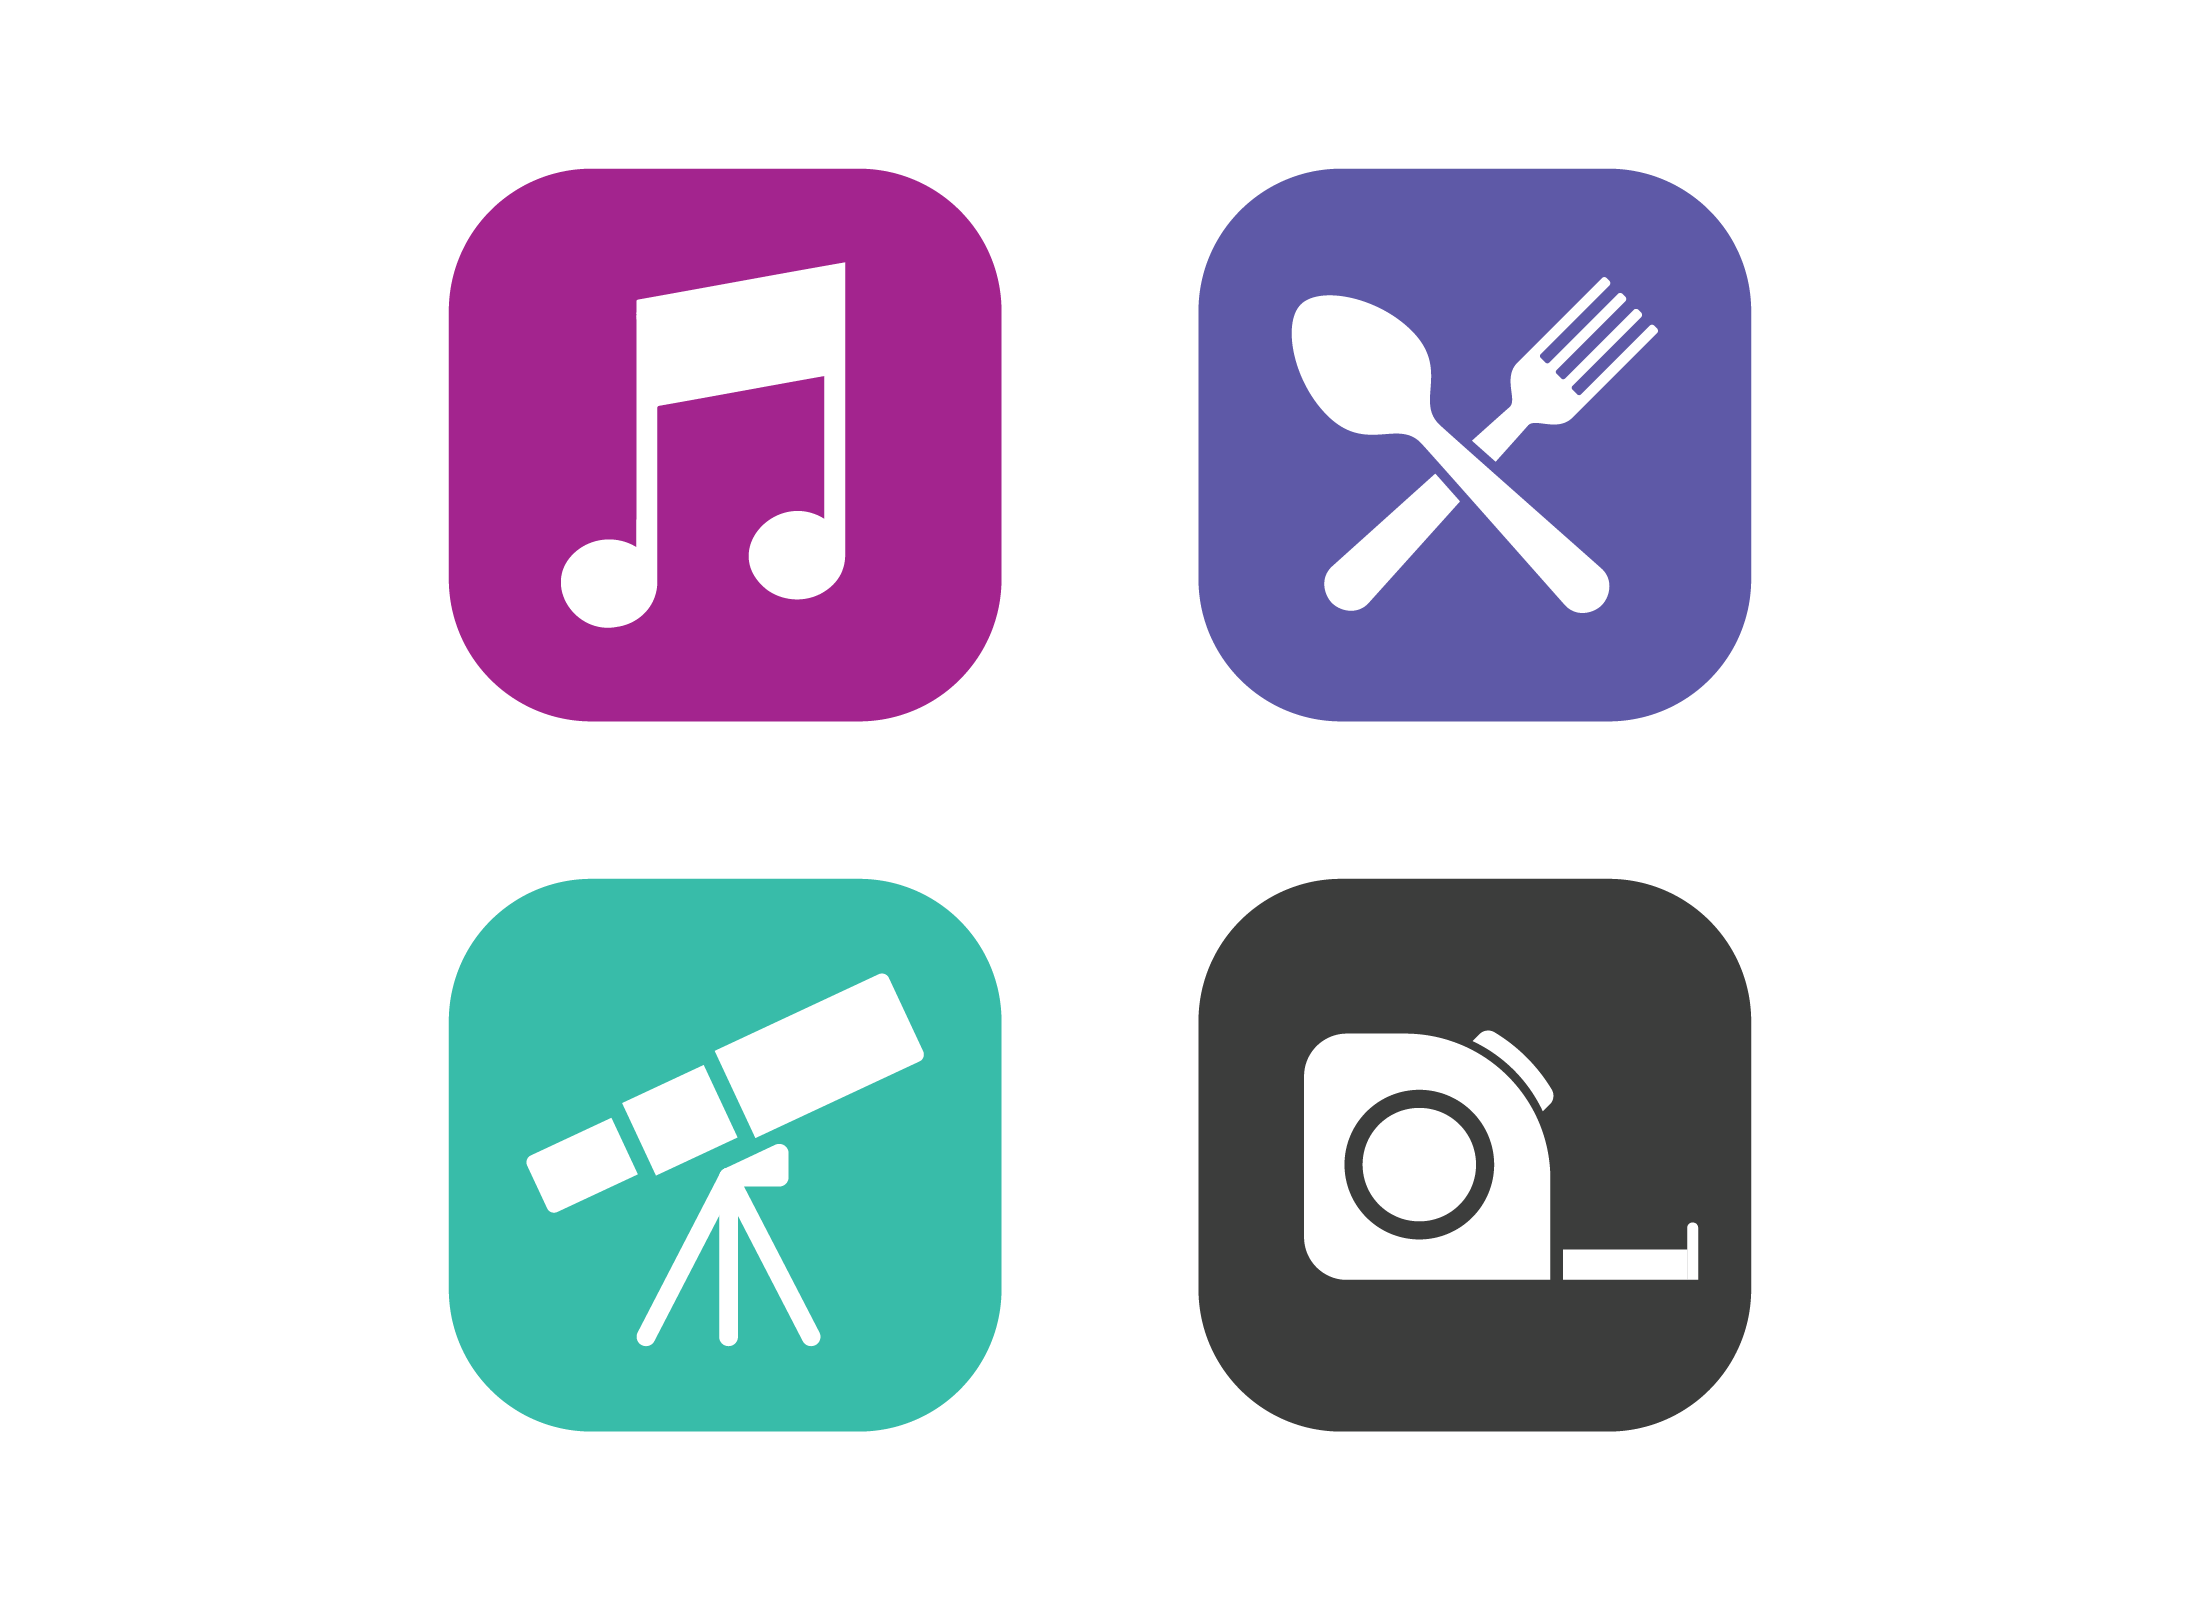 Examples of apps